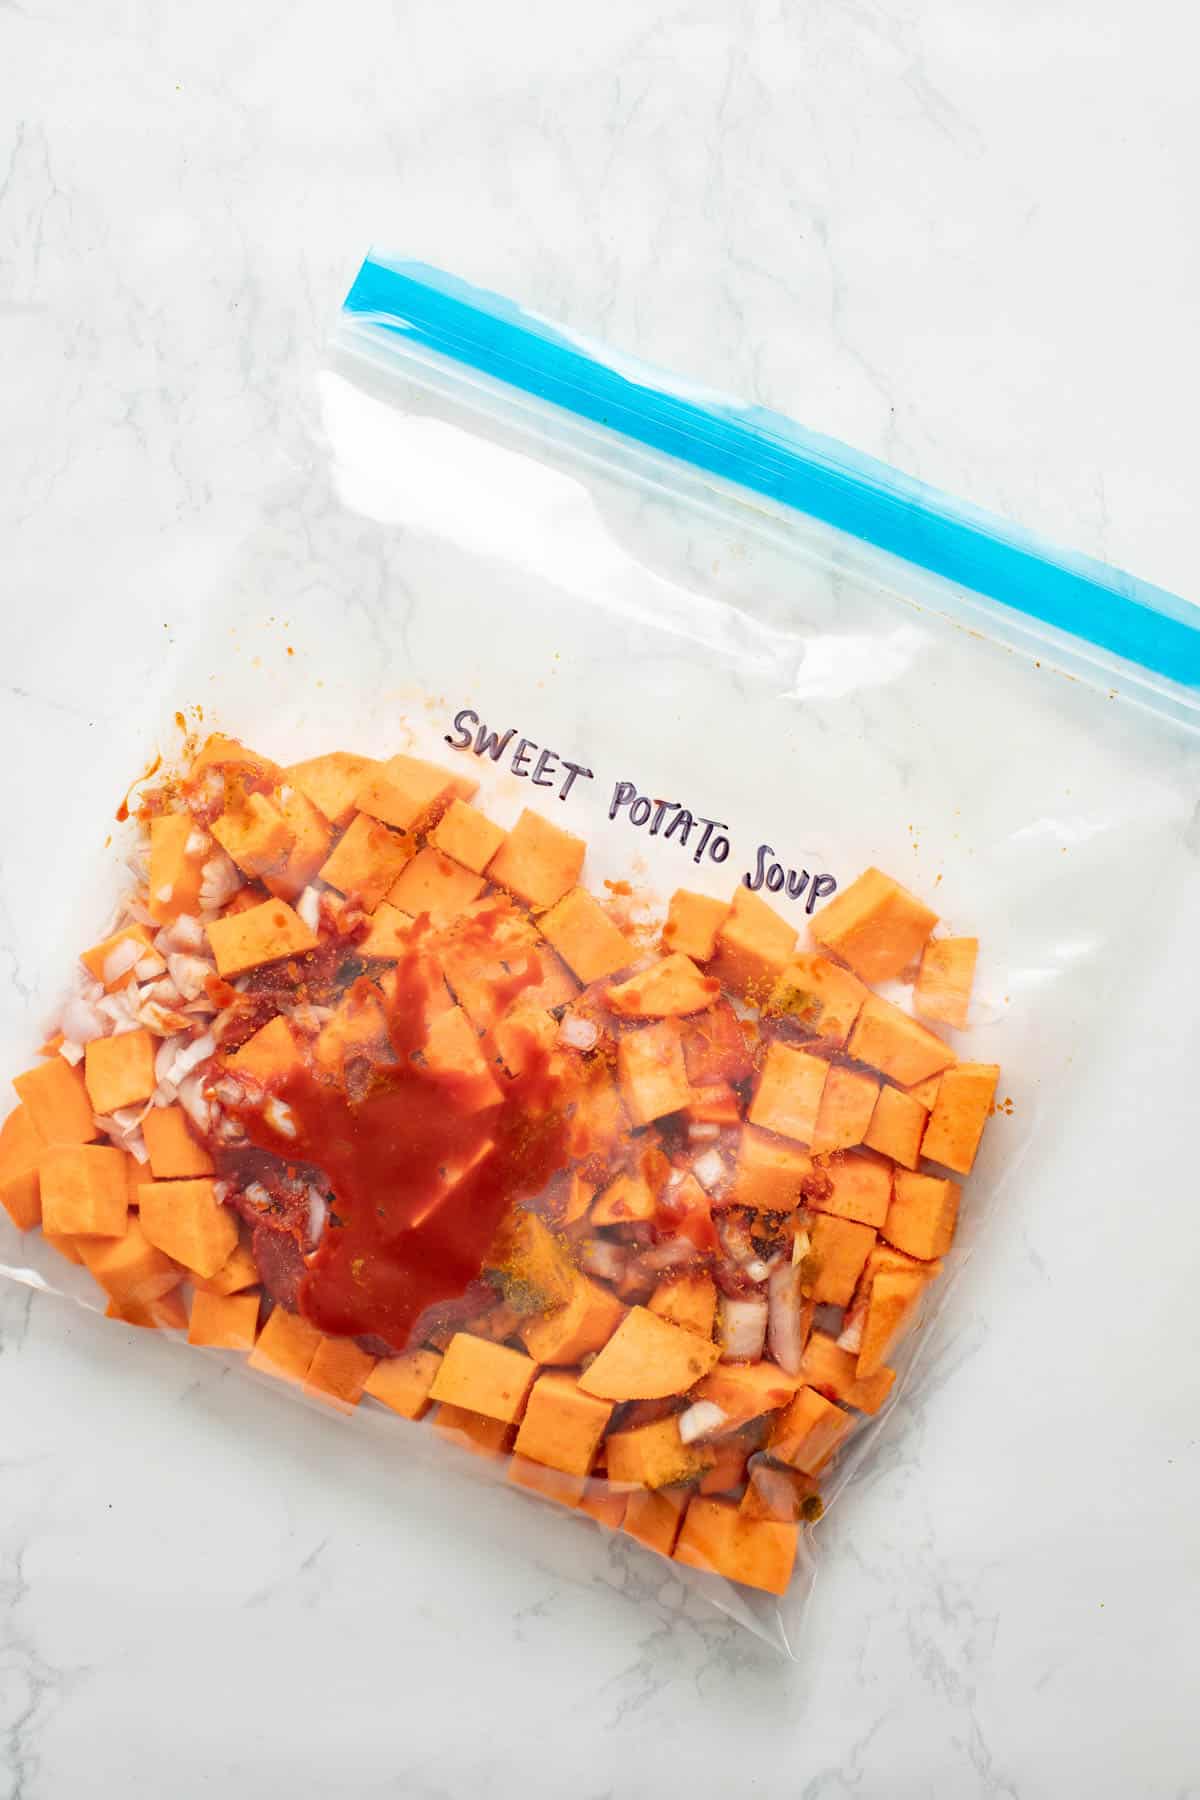 A freezer bag of ingredients with sweet potatoes and spices inside for meal prepping.